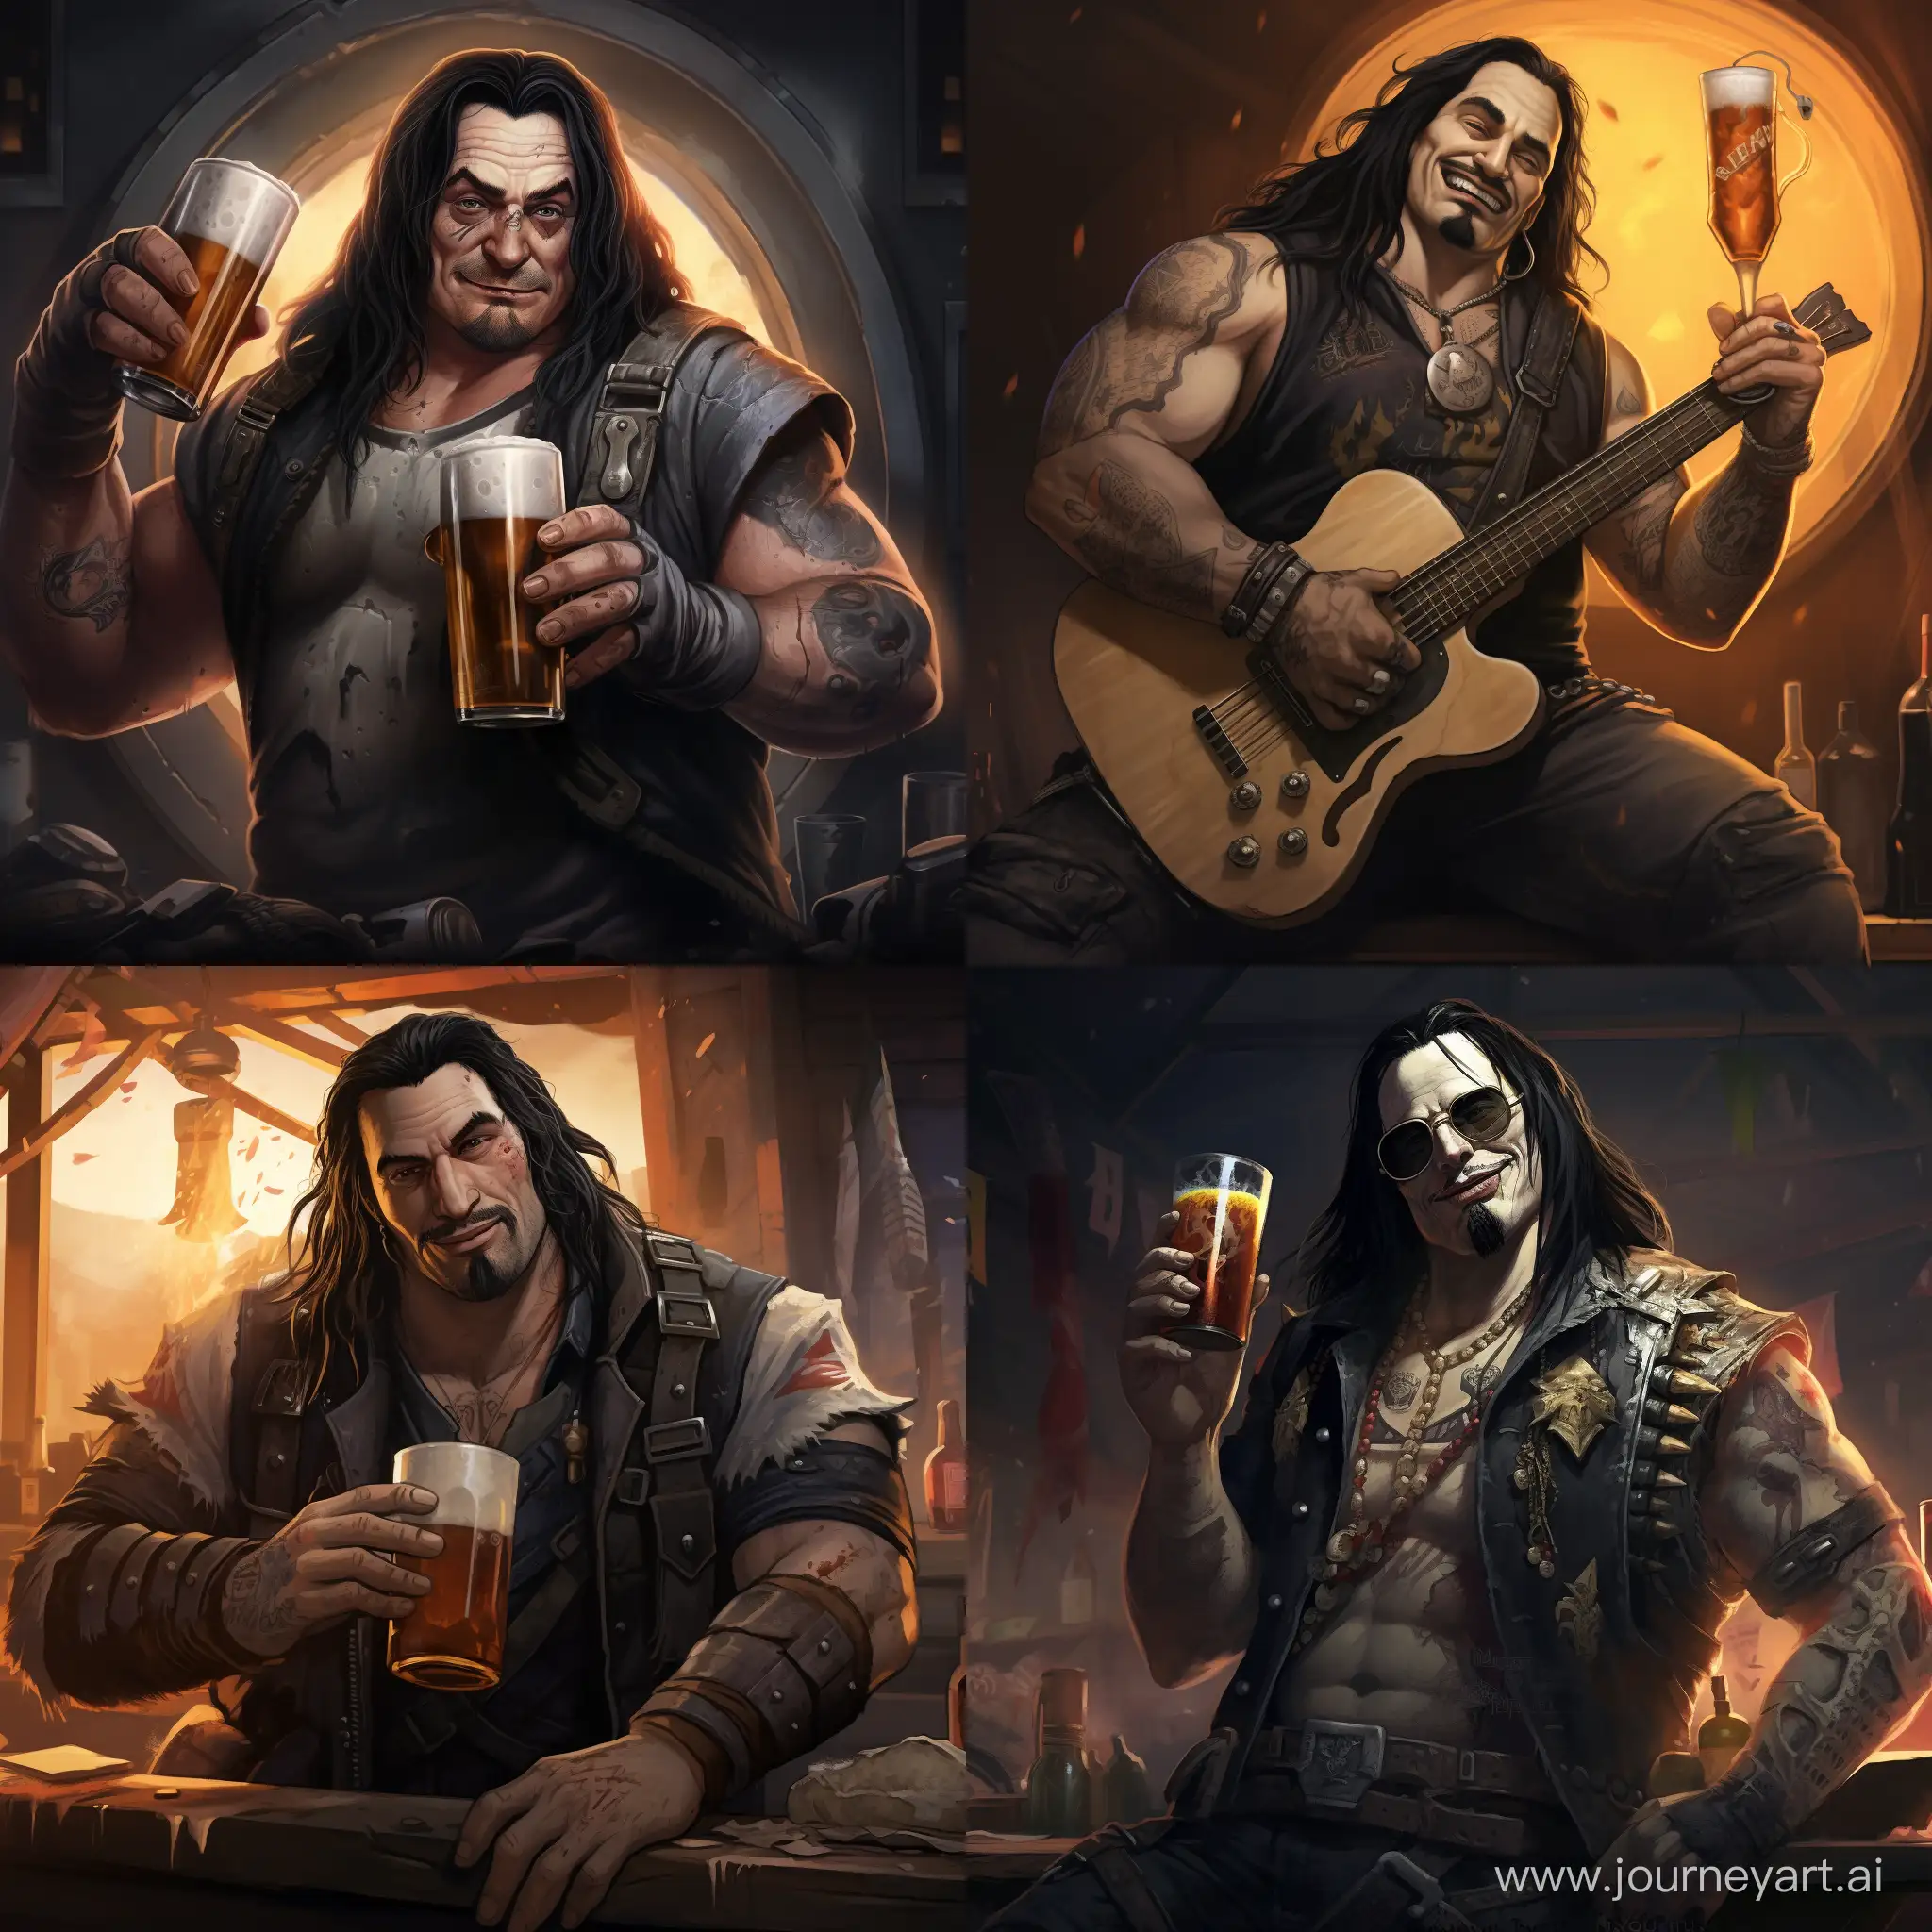 Biker-Icon-Johnny-Silverhand-Enjoying-a-Cold-Beer